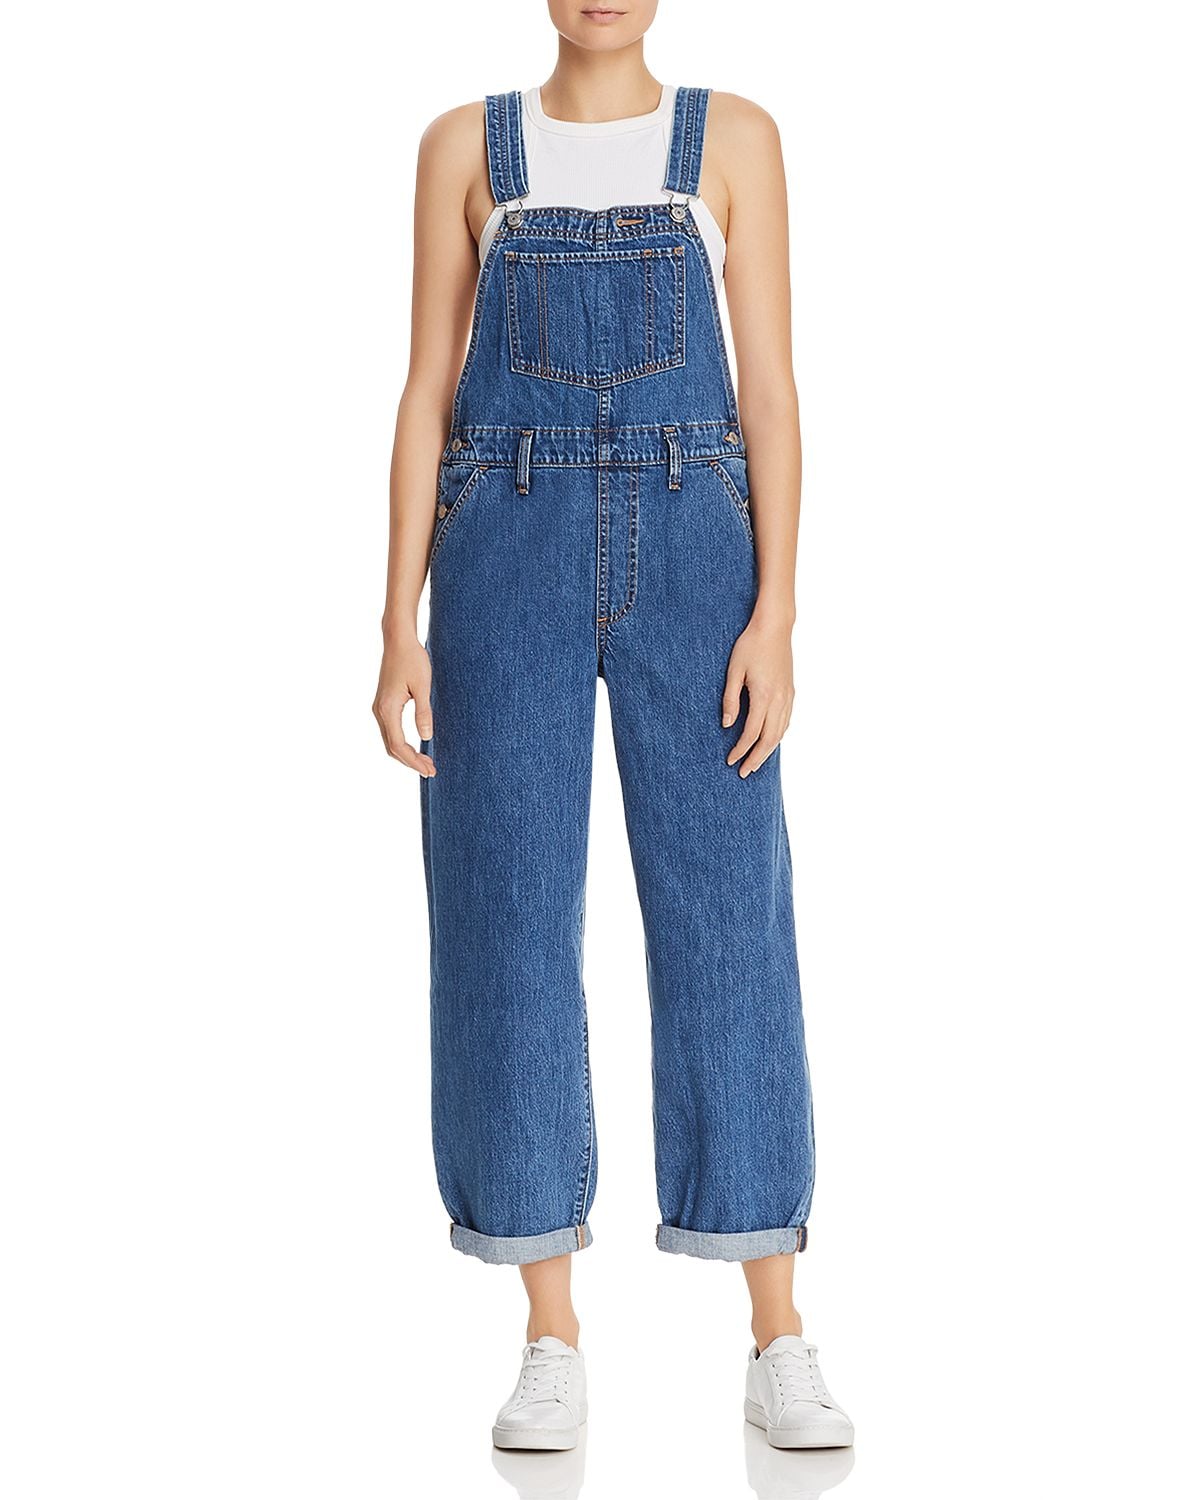 Levi's Baggy Denim Overalls in Larger Than Life | J Lo Took Us Back to the  '90s in Her Denim Overalls, and I'm Not Even Mad About It | POPSUGAR  Fashion Photo